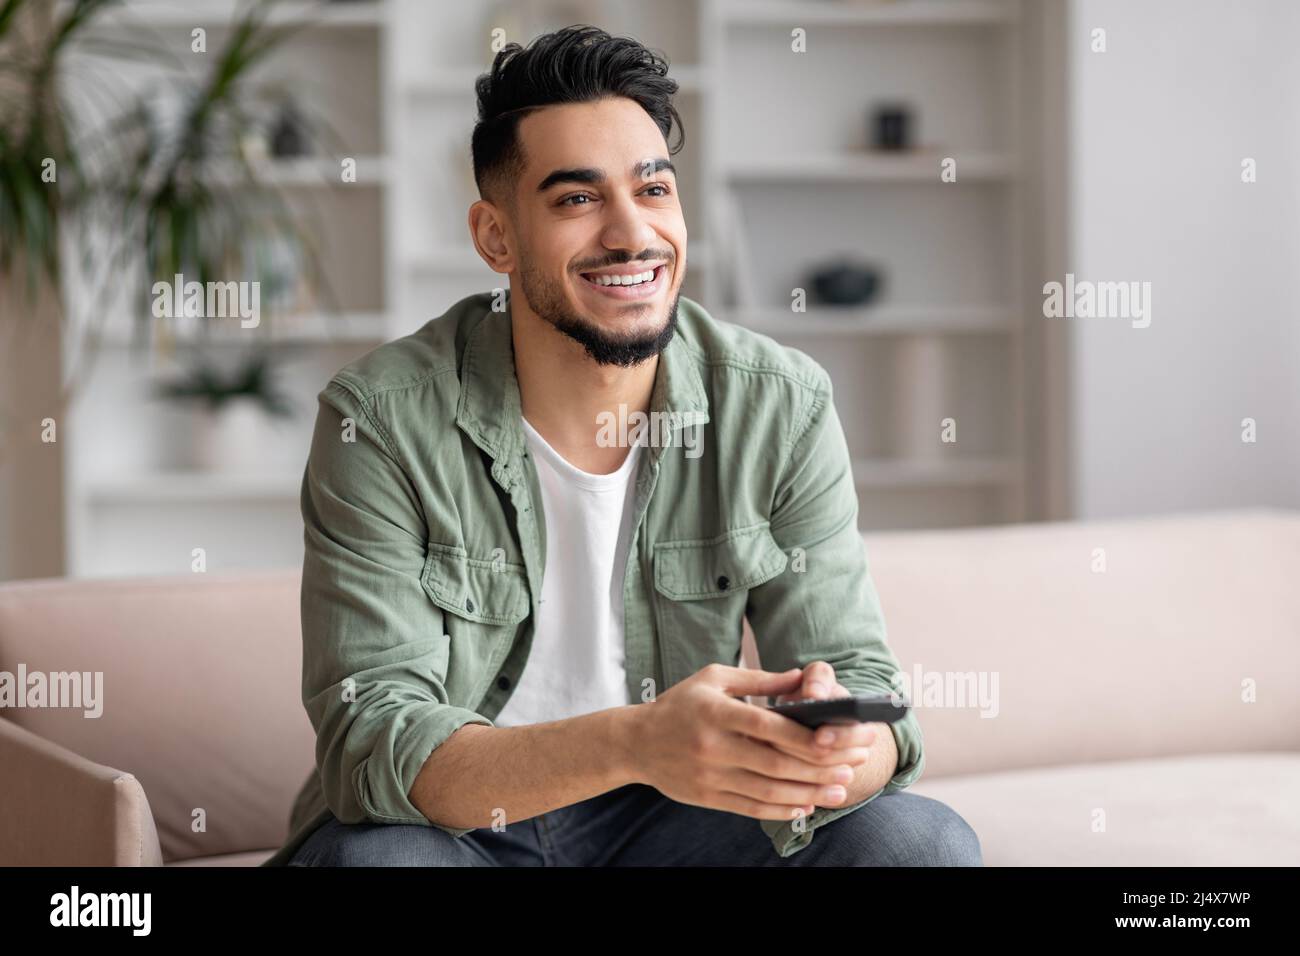 Cheerful handsome millennial arab man with beard in casual watching moving or match TV with remote control Stock Photo